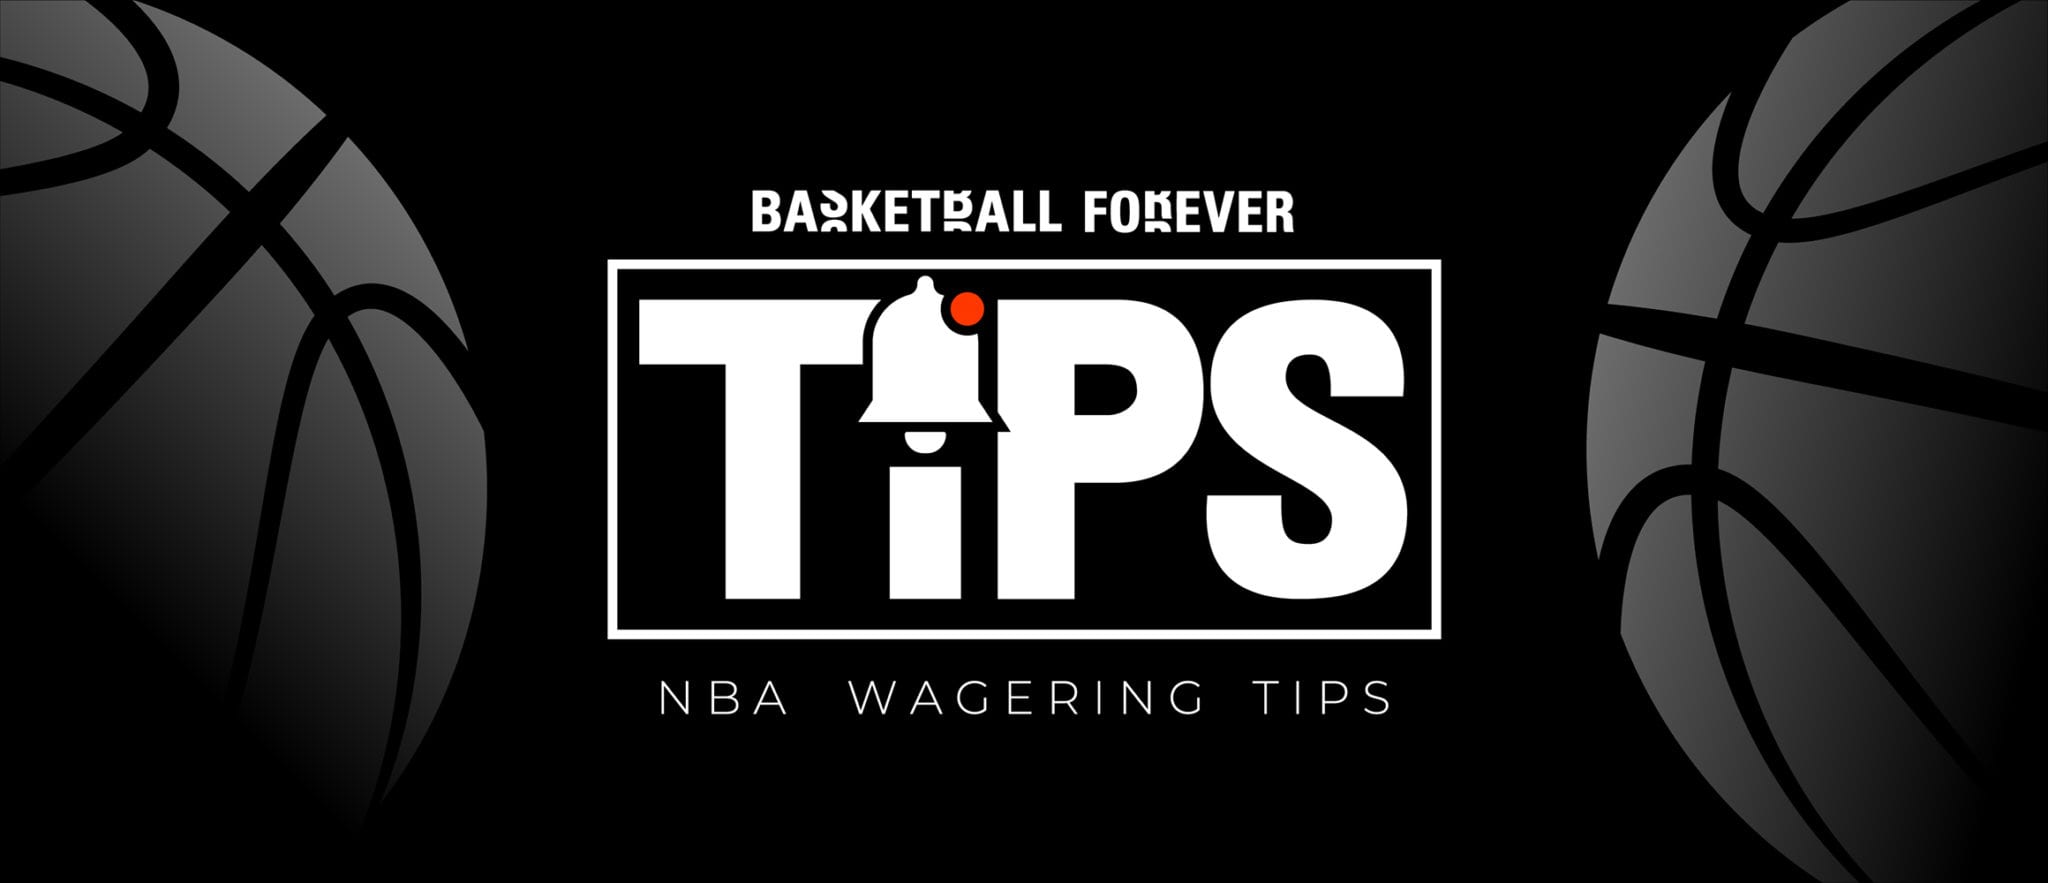 NBA TIPS – March 26, 2021